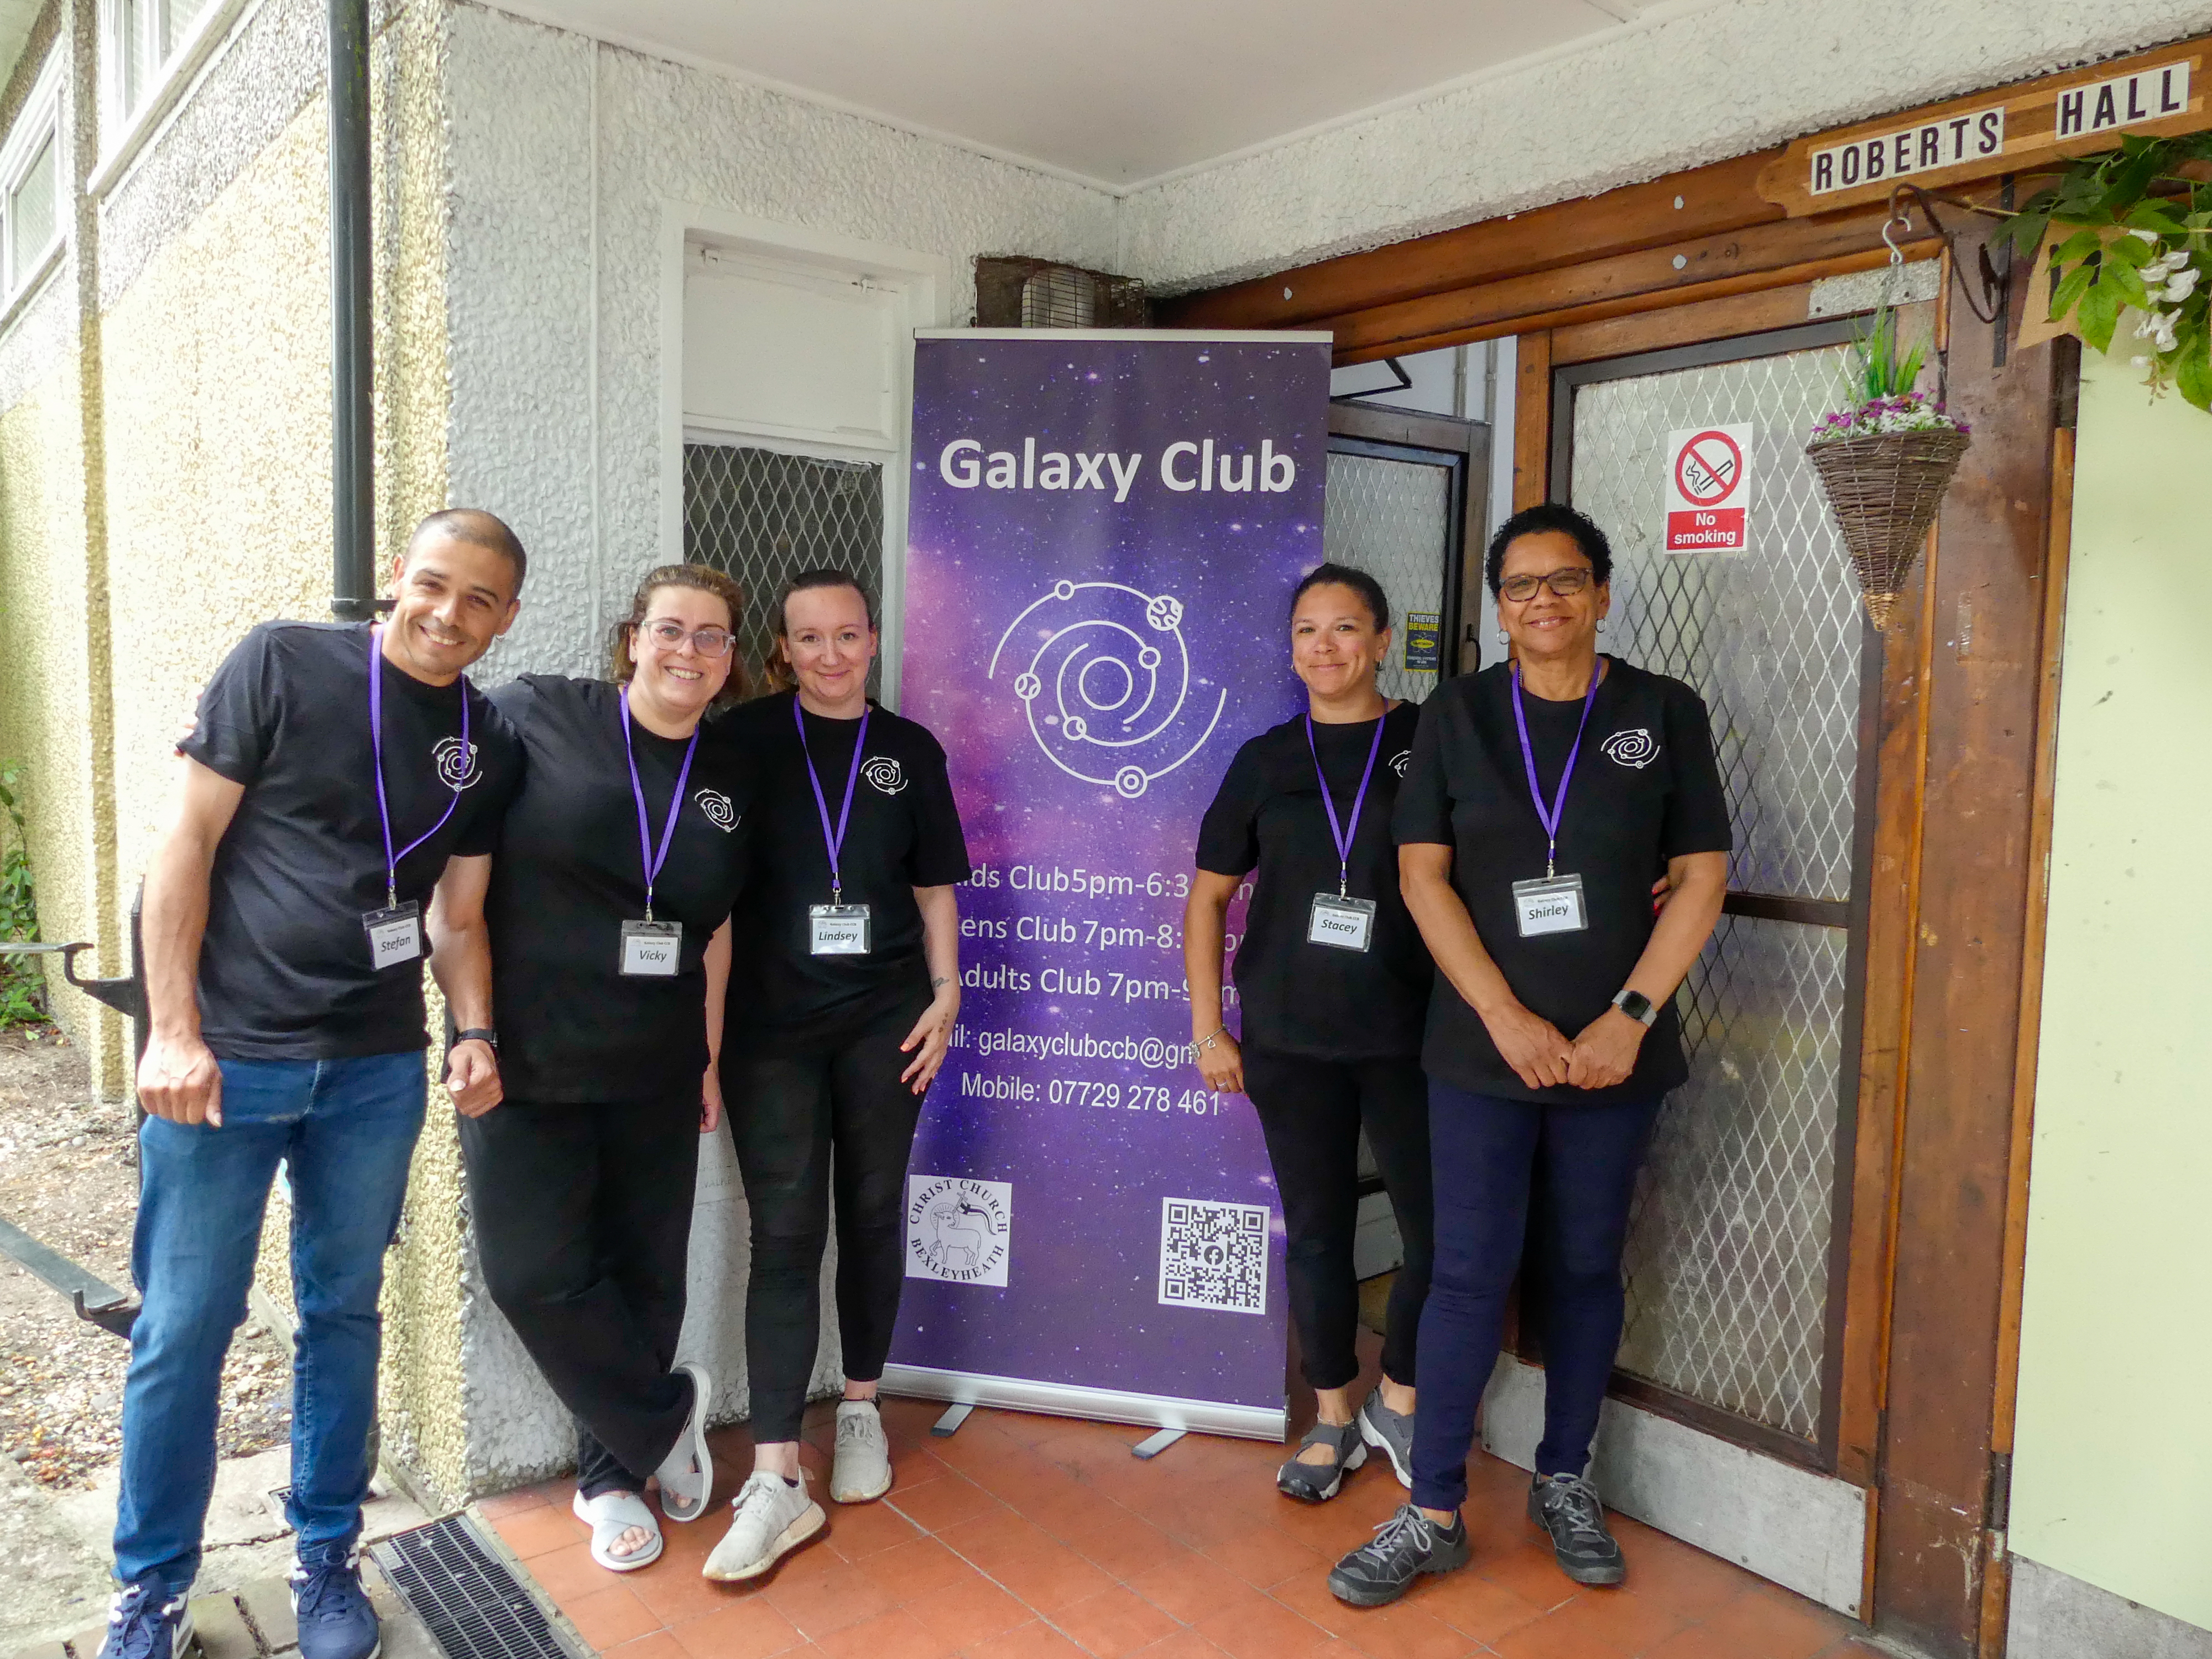 The team at Galaxy Club stand beside their group's pull up banner